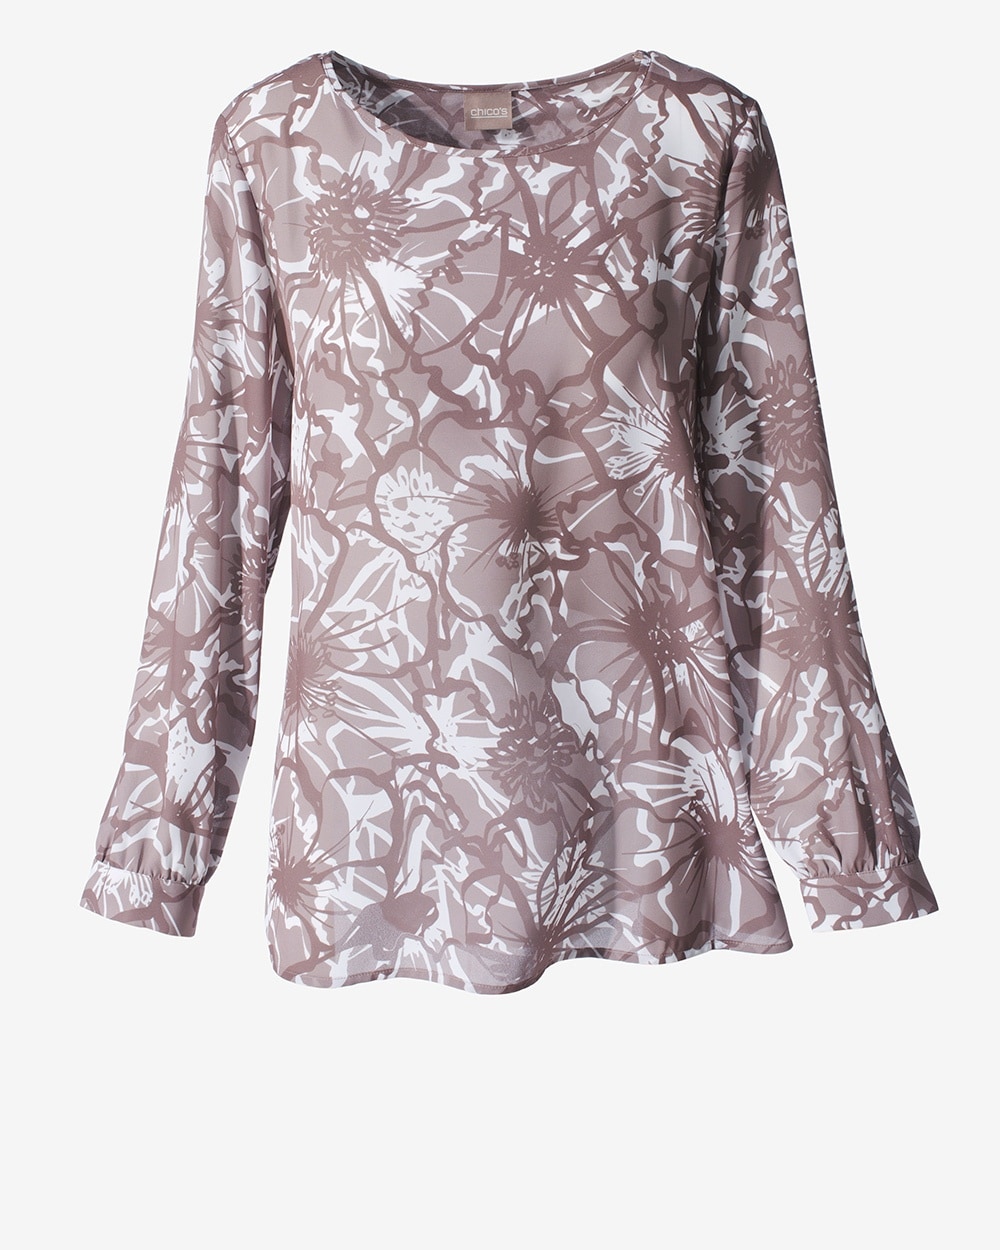 Easywear Exploded Stamped Floral Tunic